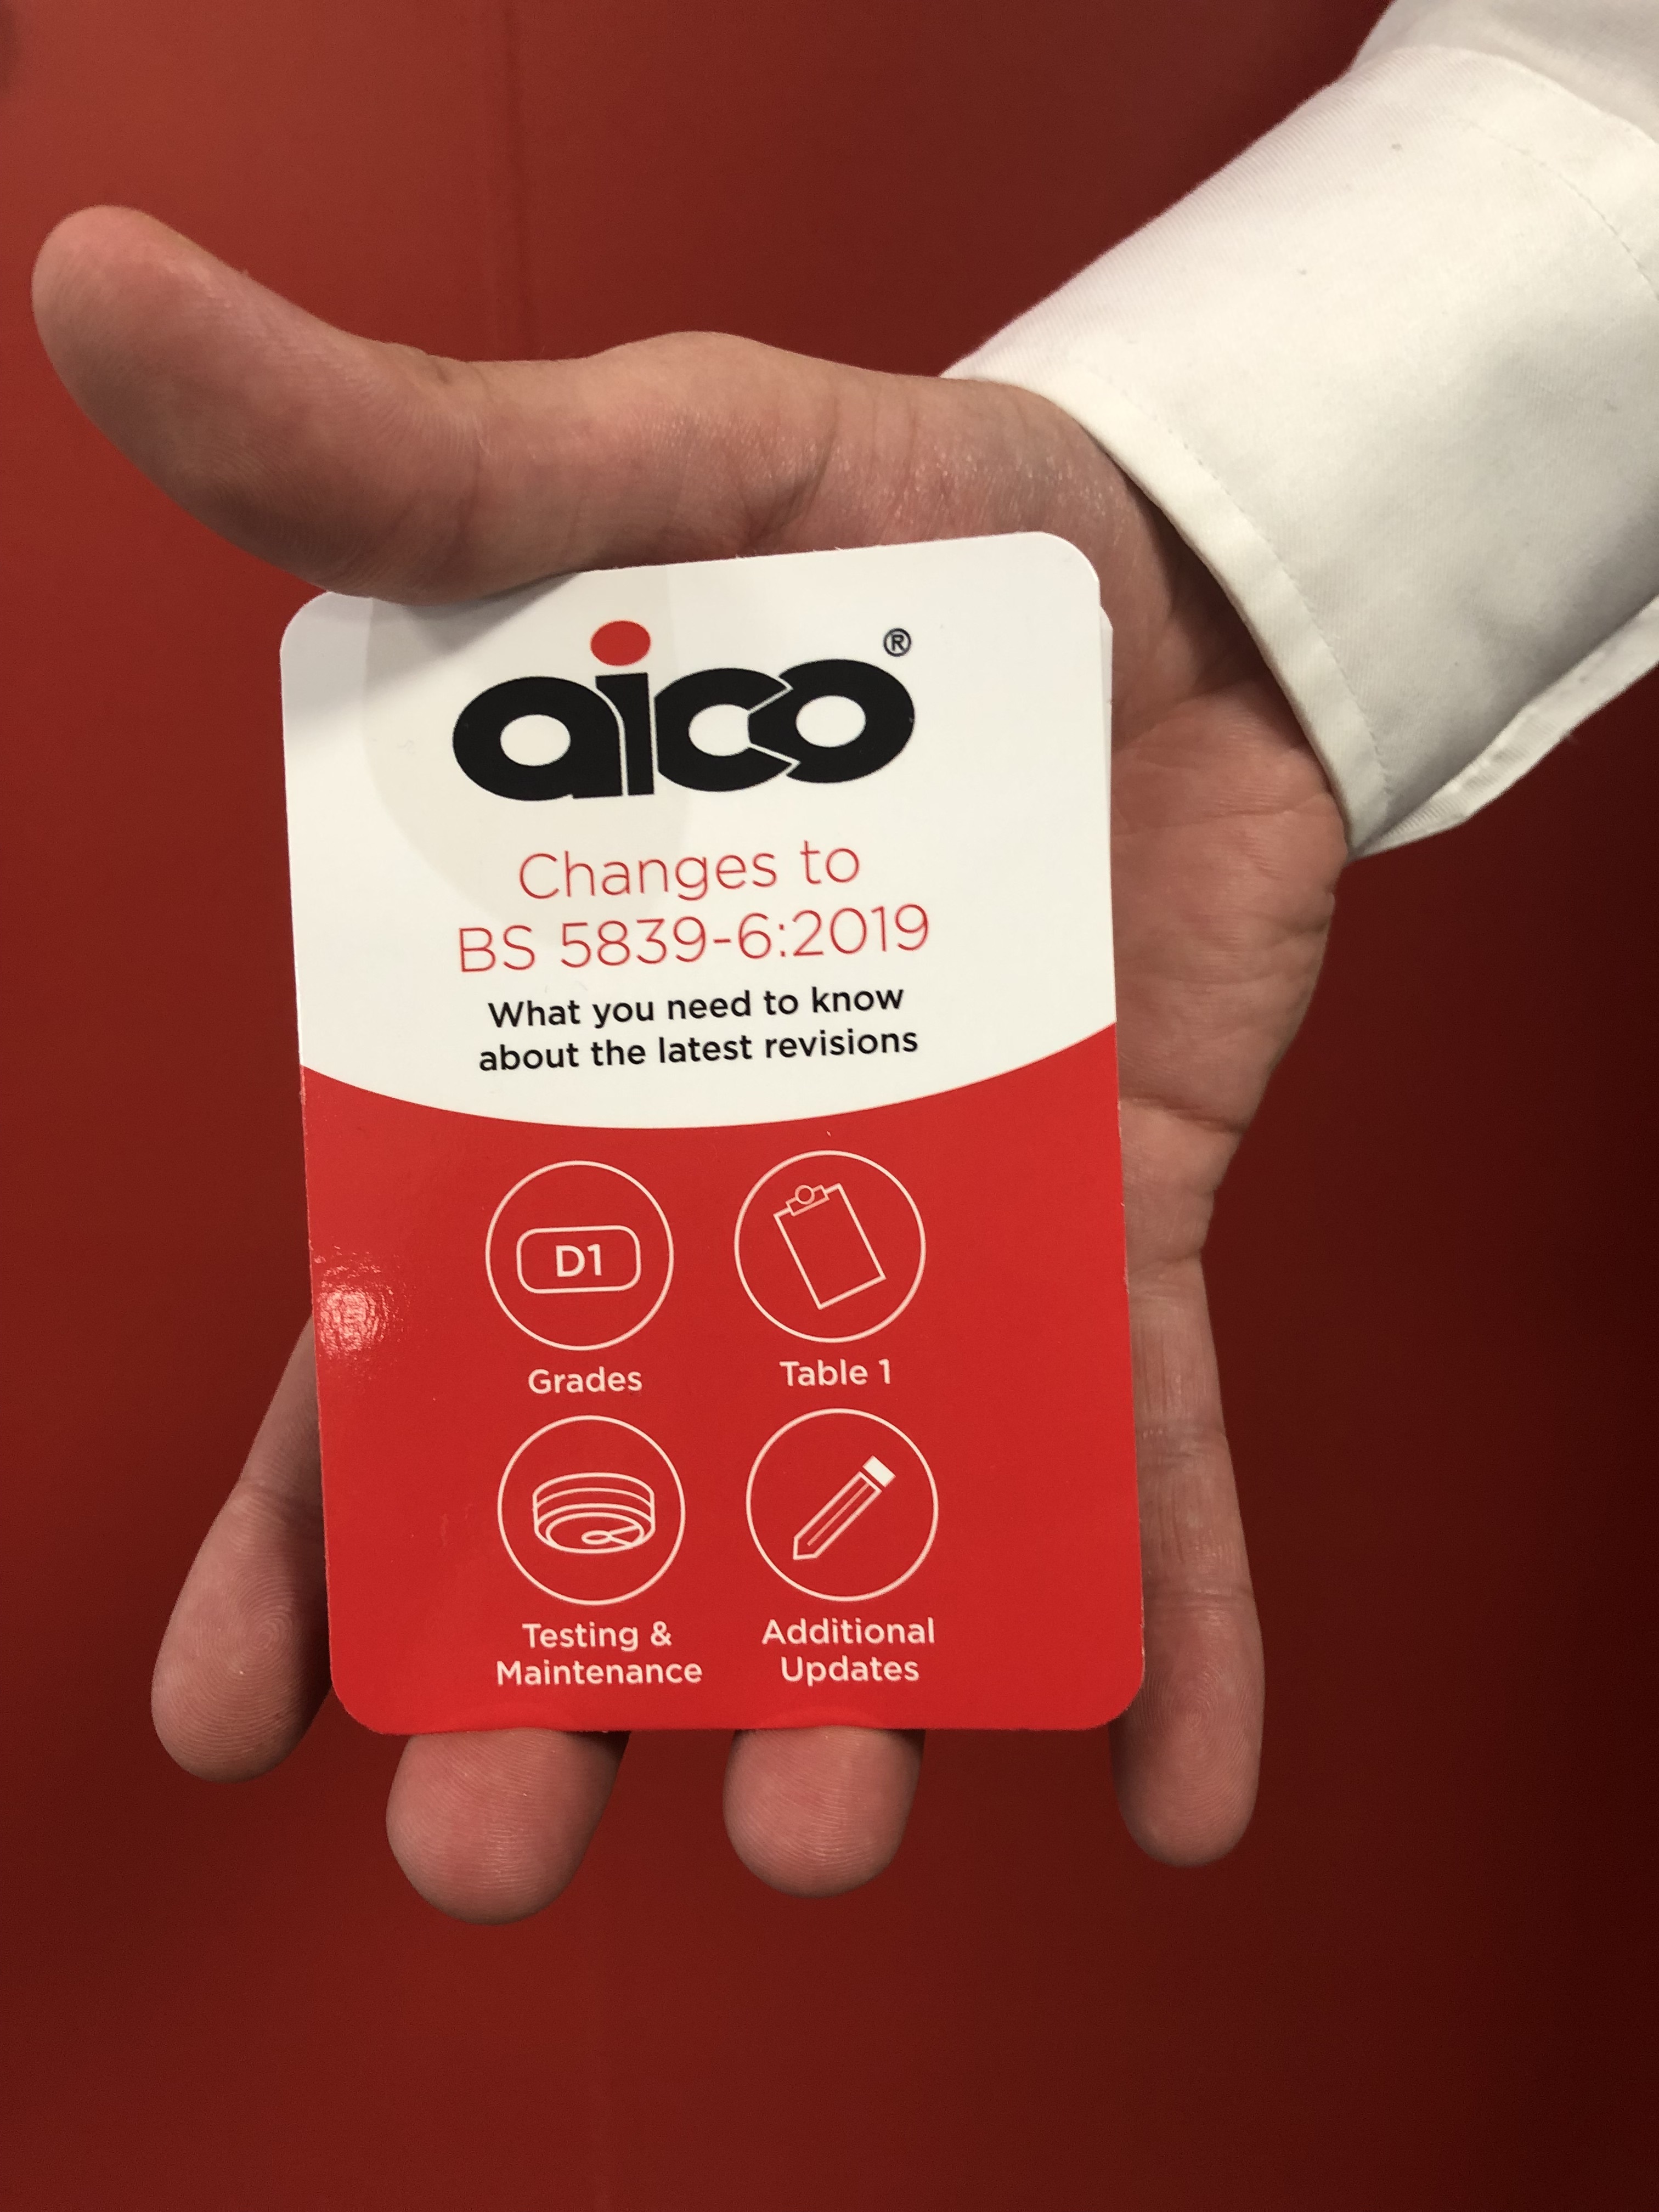 Advertorial: BS 5839-6:2019: all the information you need, in your pocket, courtesy of Aico